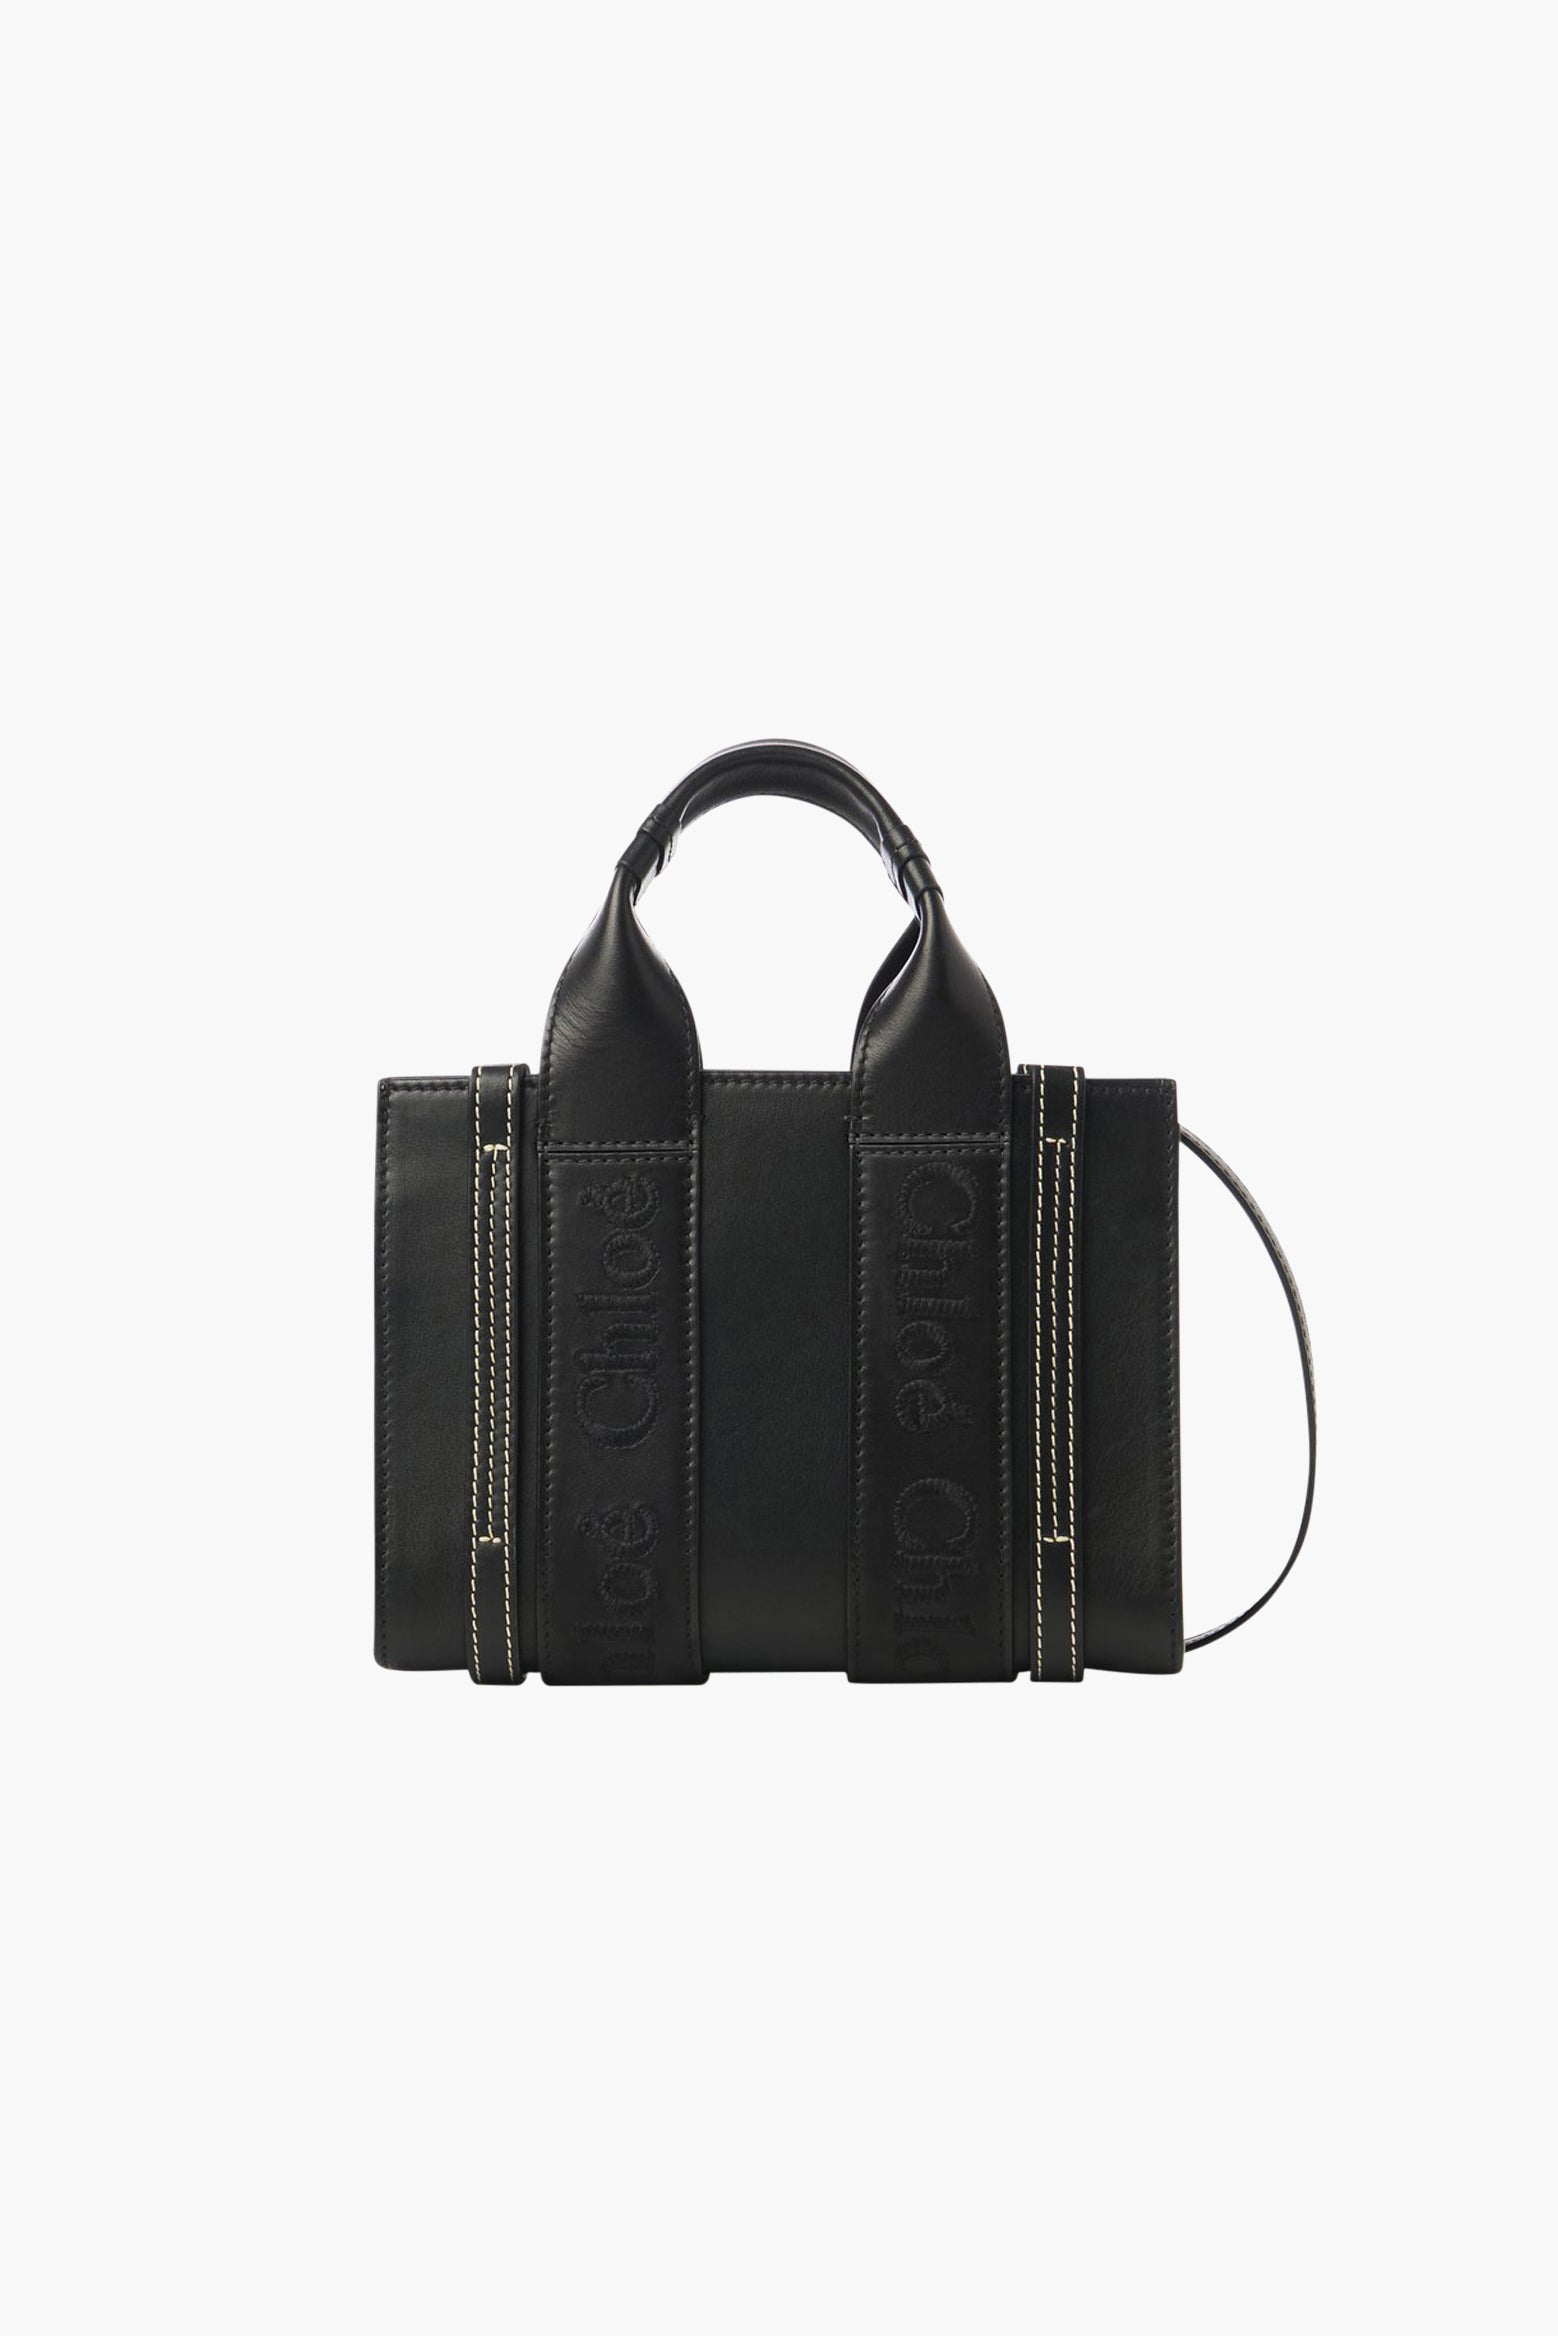 Chloe Woody Mini Leather Tote With Strap in Black available at TNT The New Trend Australia.